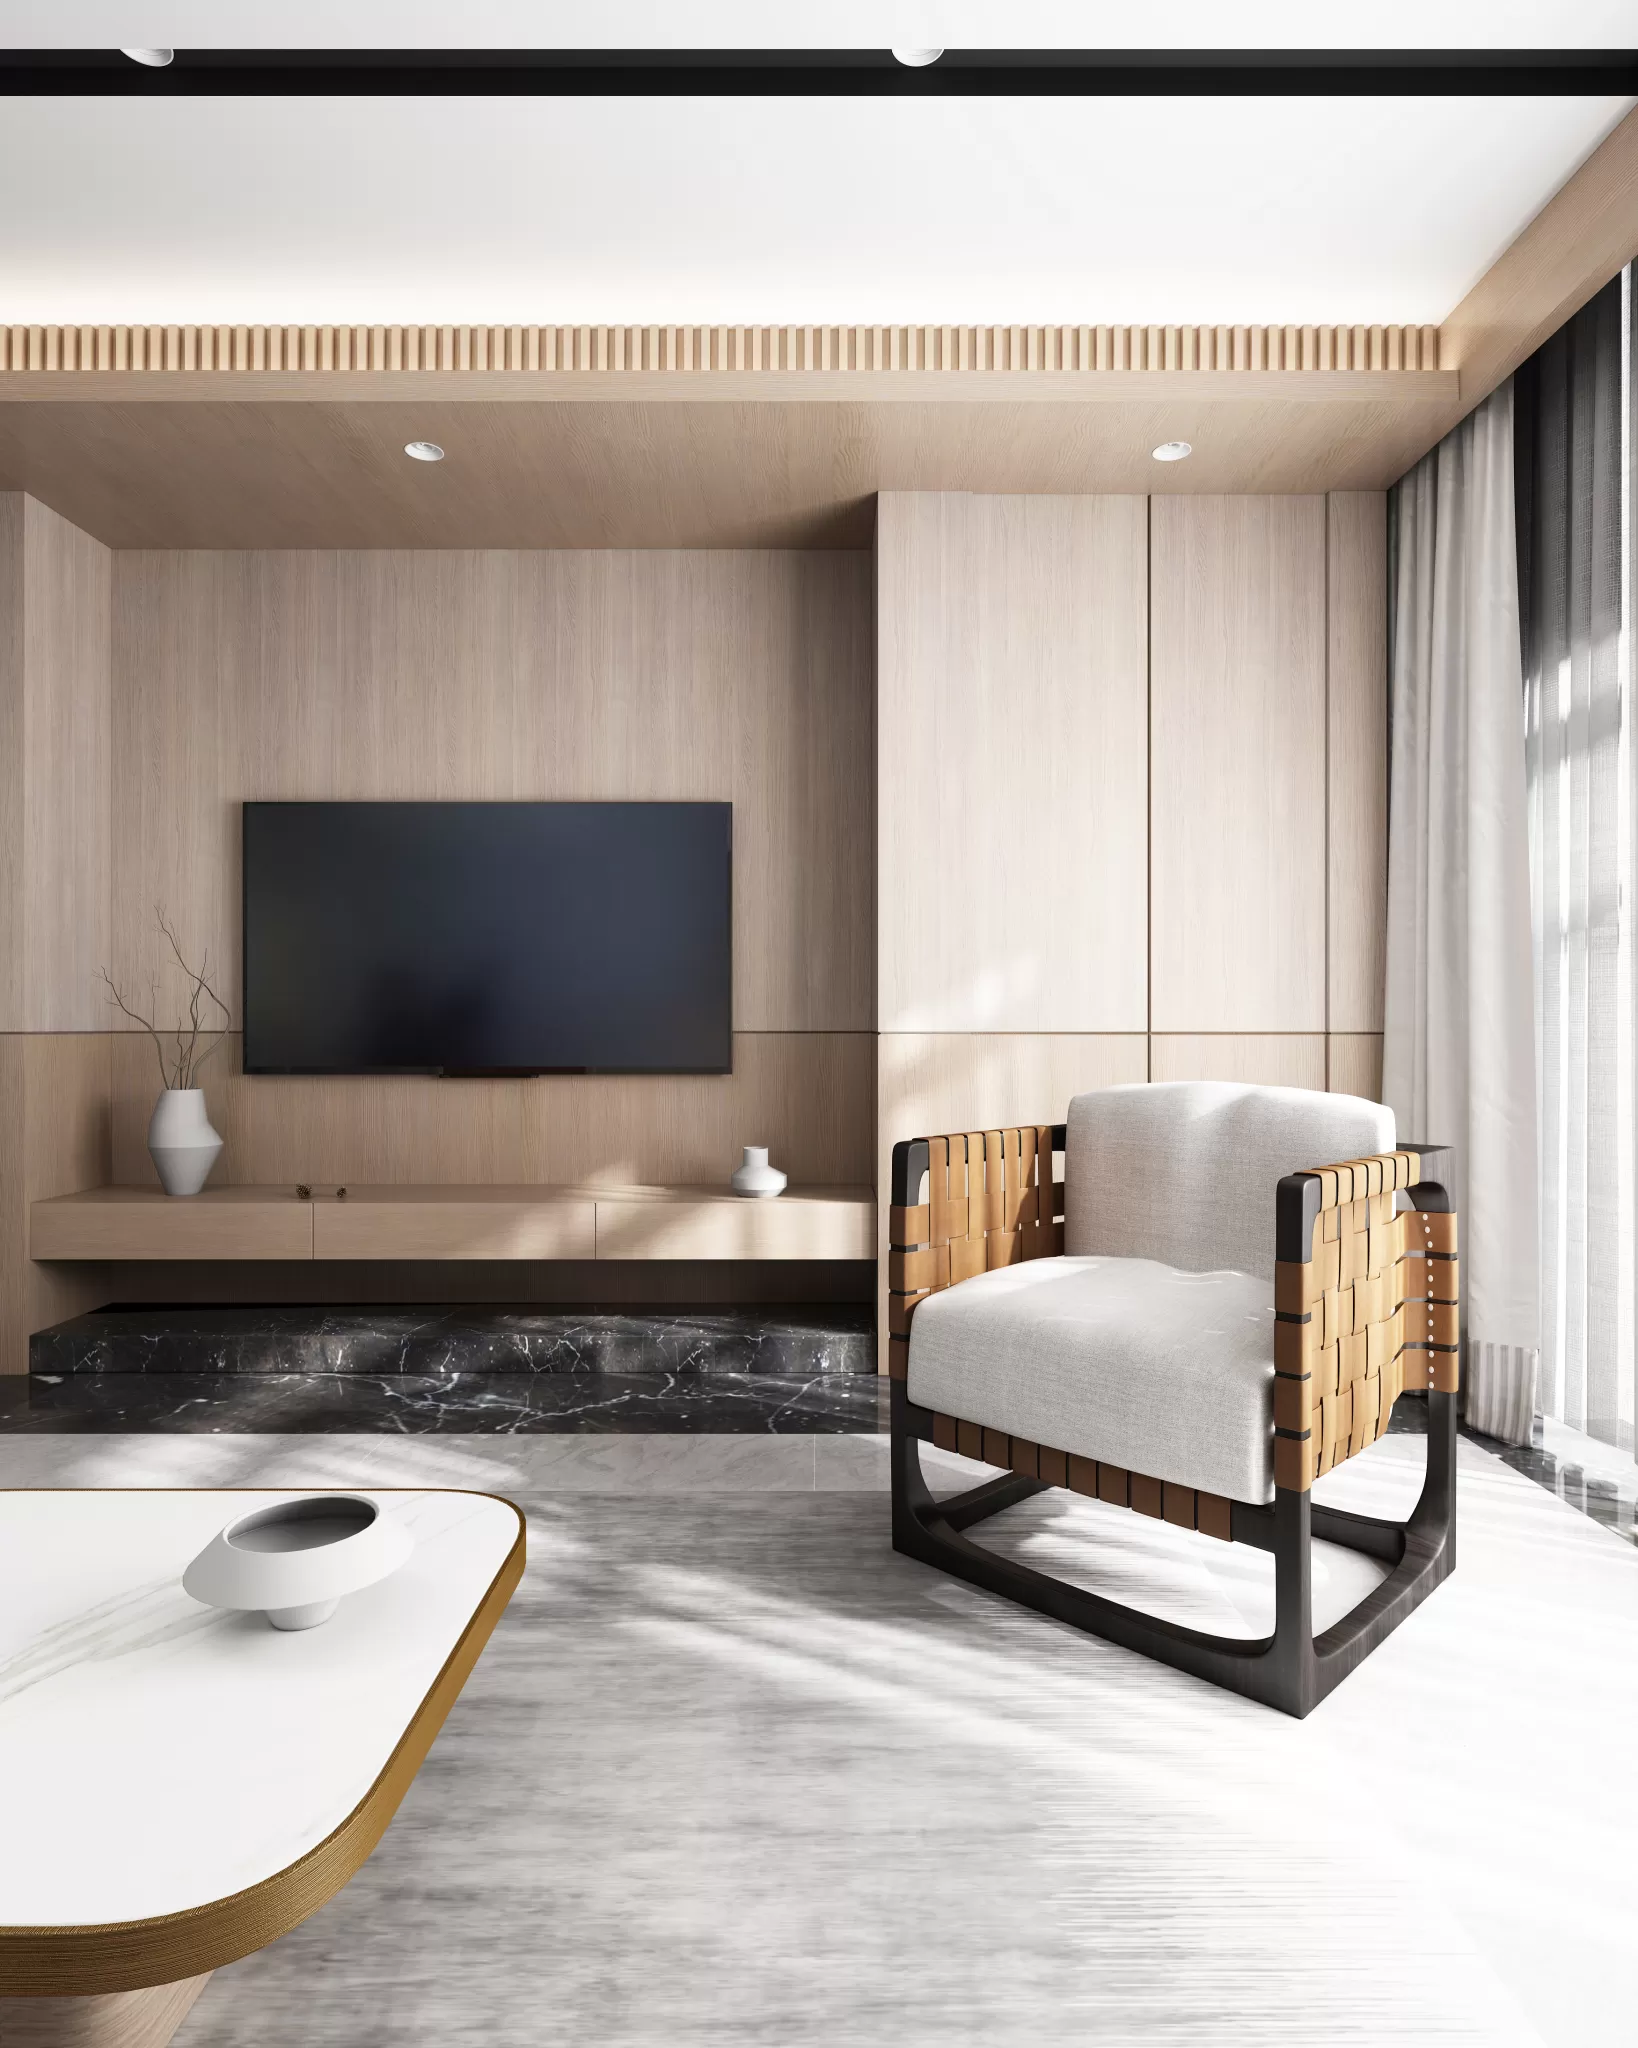 DESMOD INTERIOR 2021 (VRAY) – 4. LIVING ROOM – CHINESE – 001